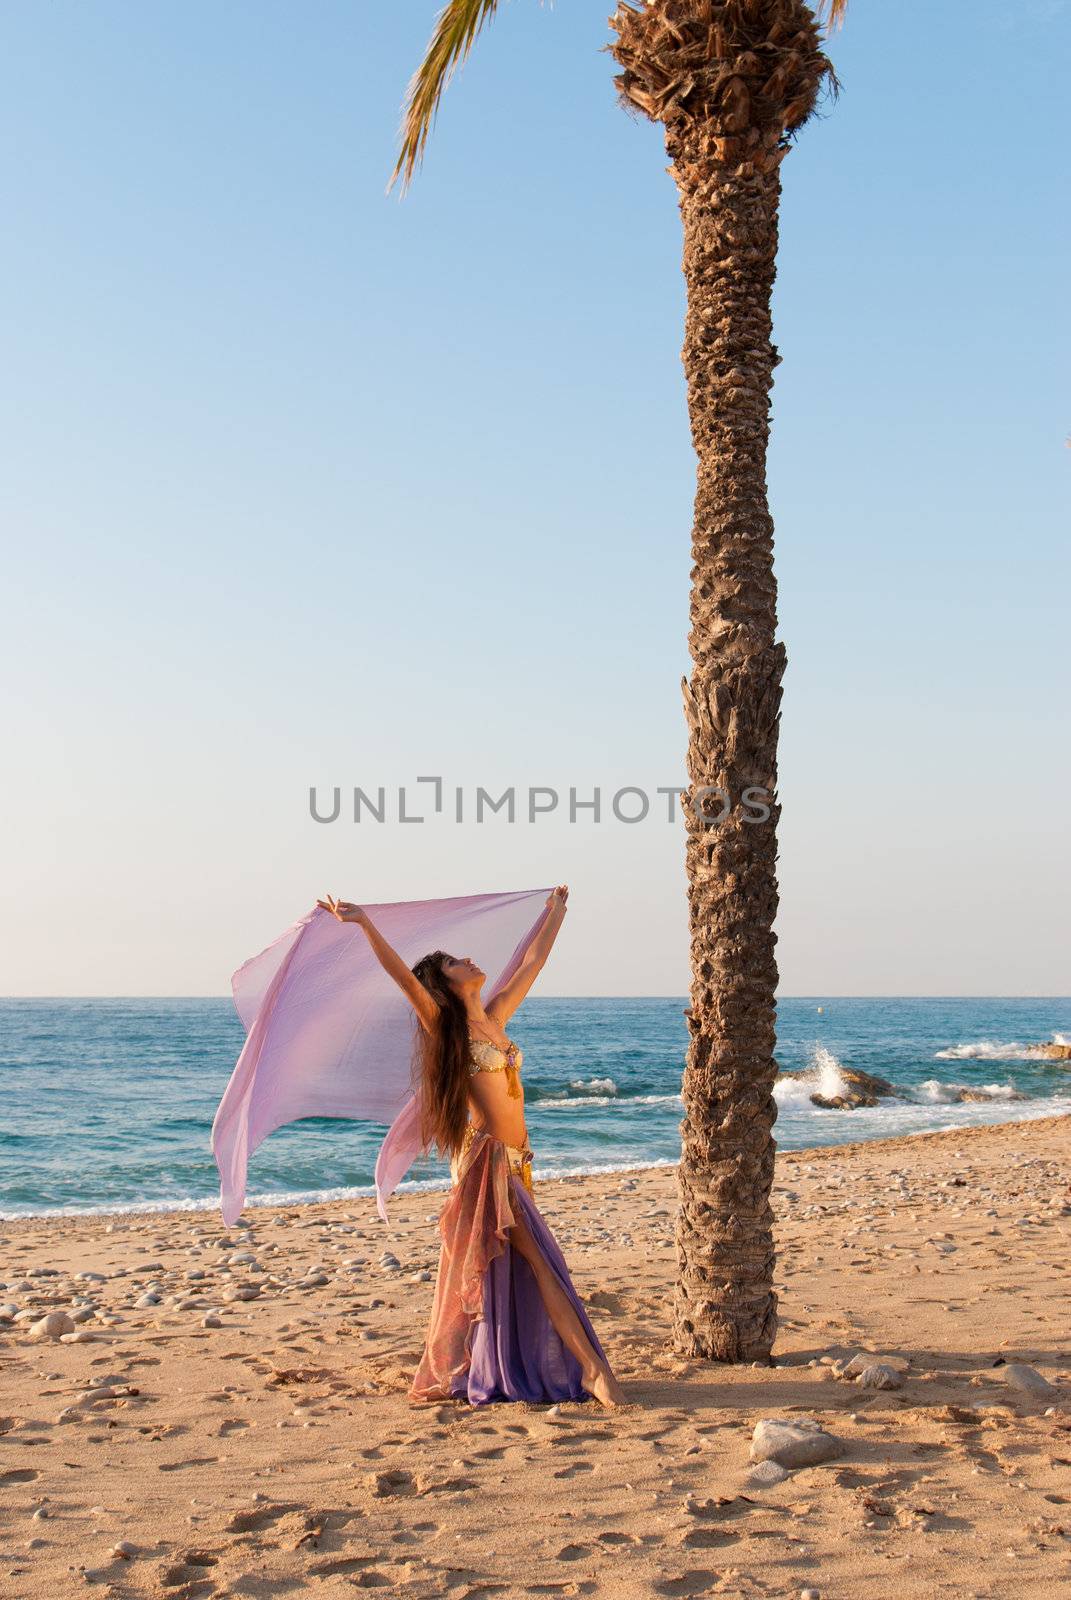 Oriental dancer with fluttering headscarf on beach setting